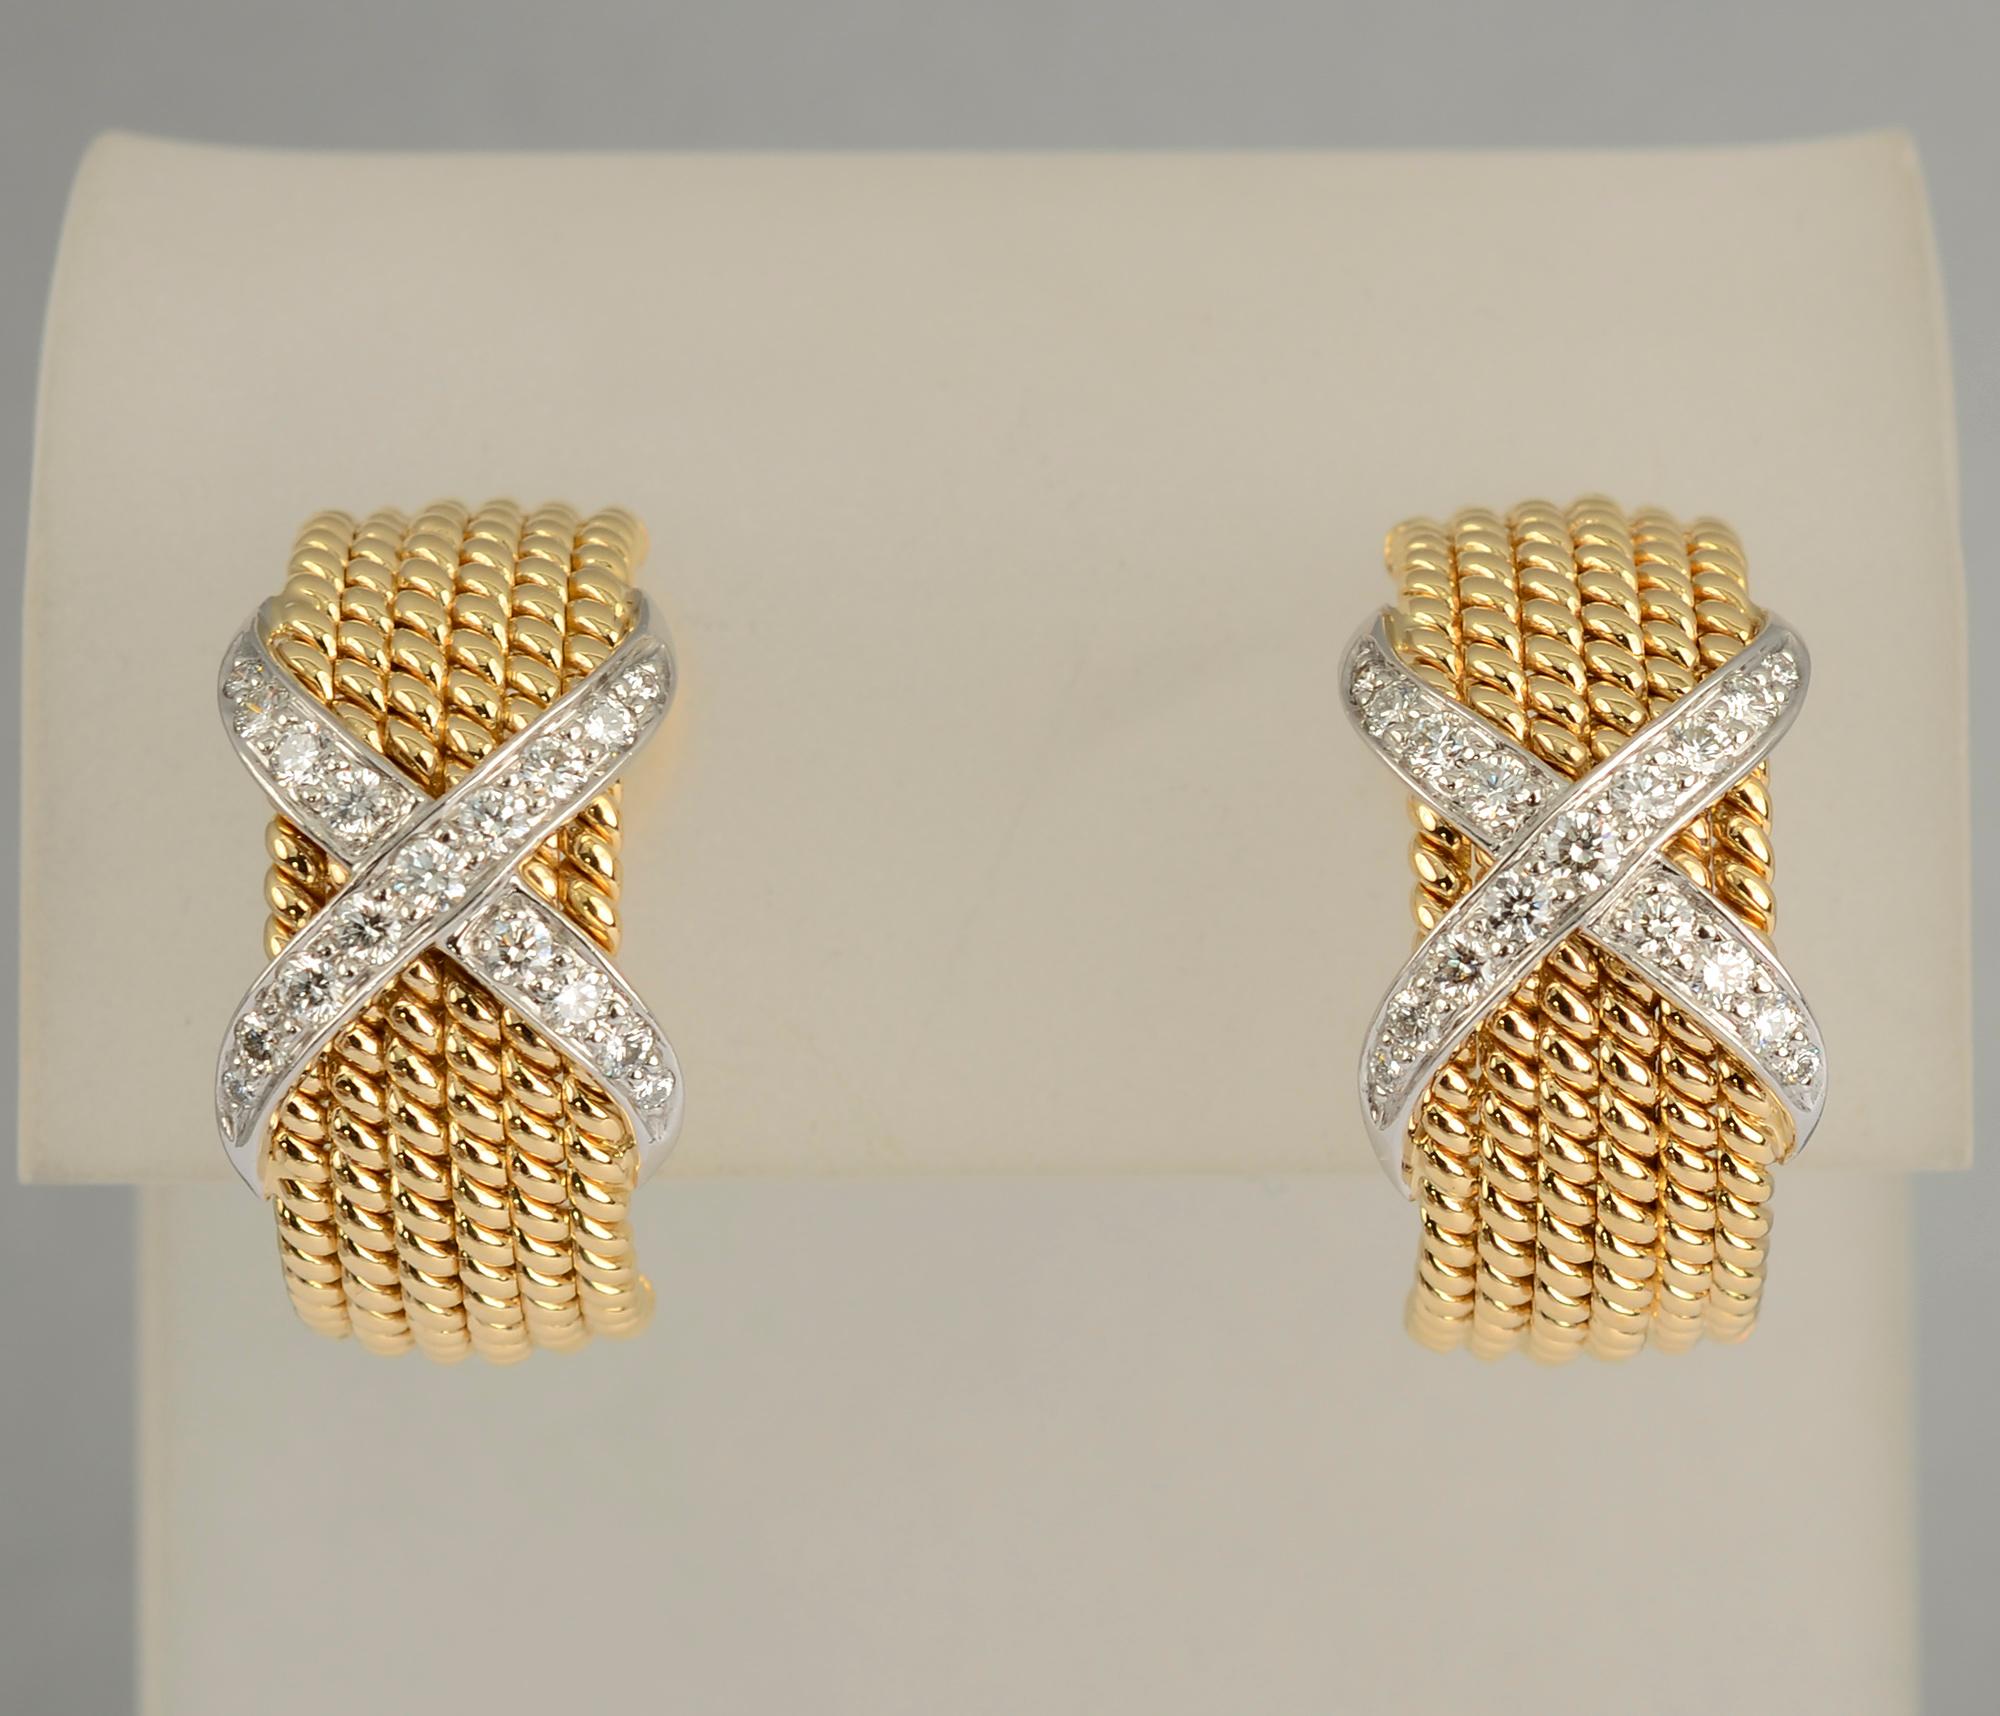 Classic Schlumberger for Tiffany earrings of six rows of twisted gold over which is sumperimposed an X of diamonds. The earrings are 18 karat yellow gold and the diamonds are set in platinum. They measure half an inch wide and three quarters of an